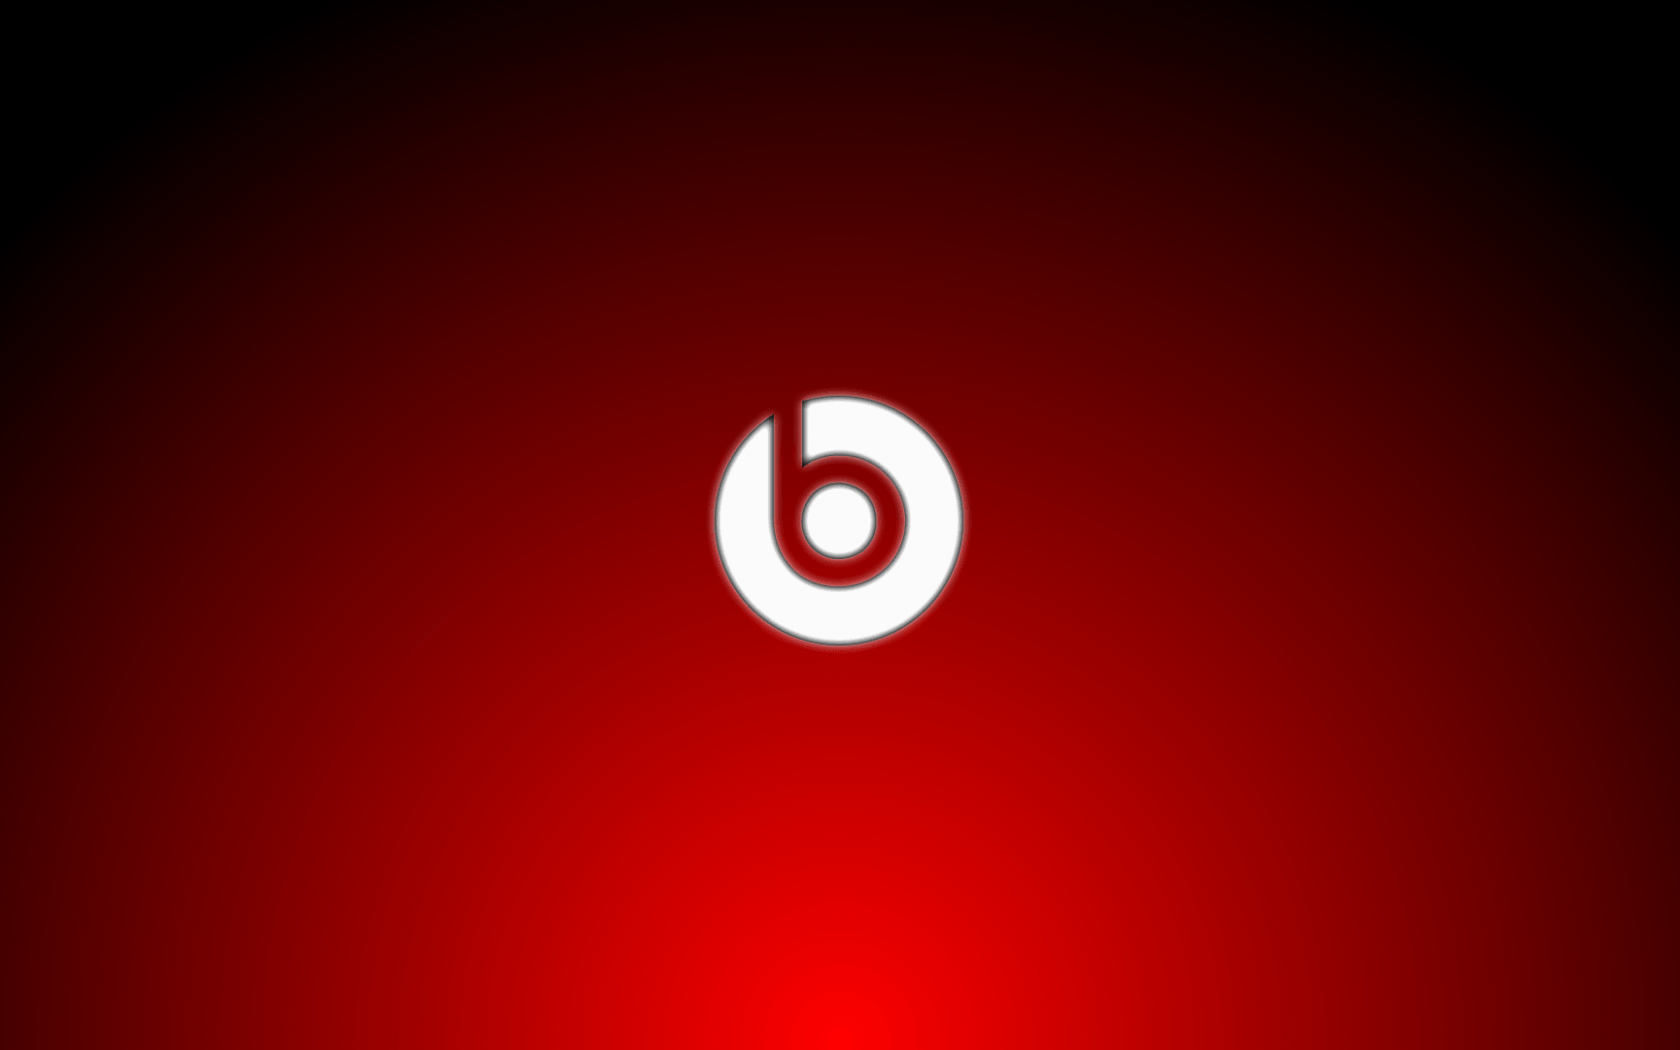 Red Beats Logo - Red And White Beats Logo Wallpaper | PaperPull